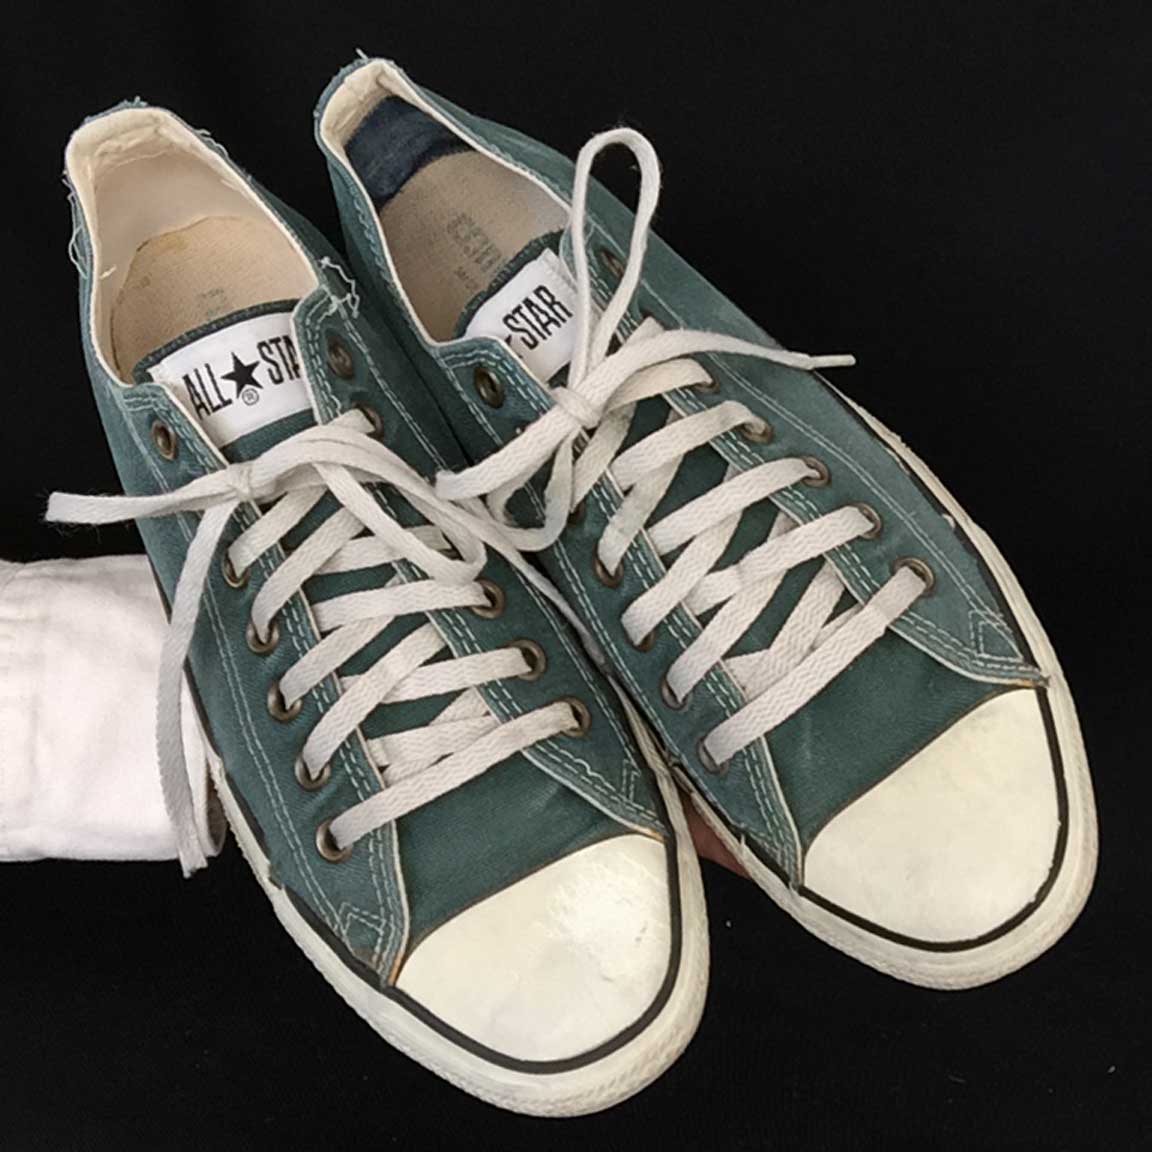 Vintage American-made Converse All Star Chuck Taylor green shoes for sale at http://www.collectornet.net/shoes